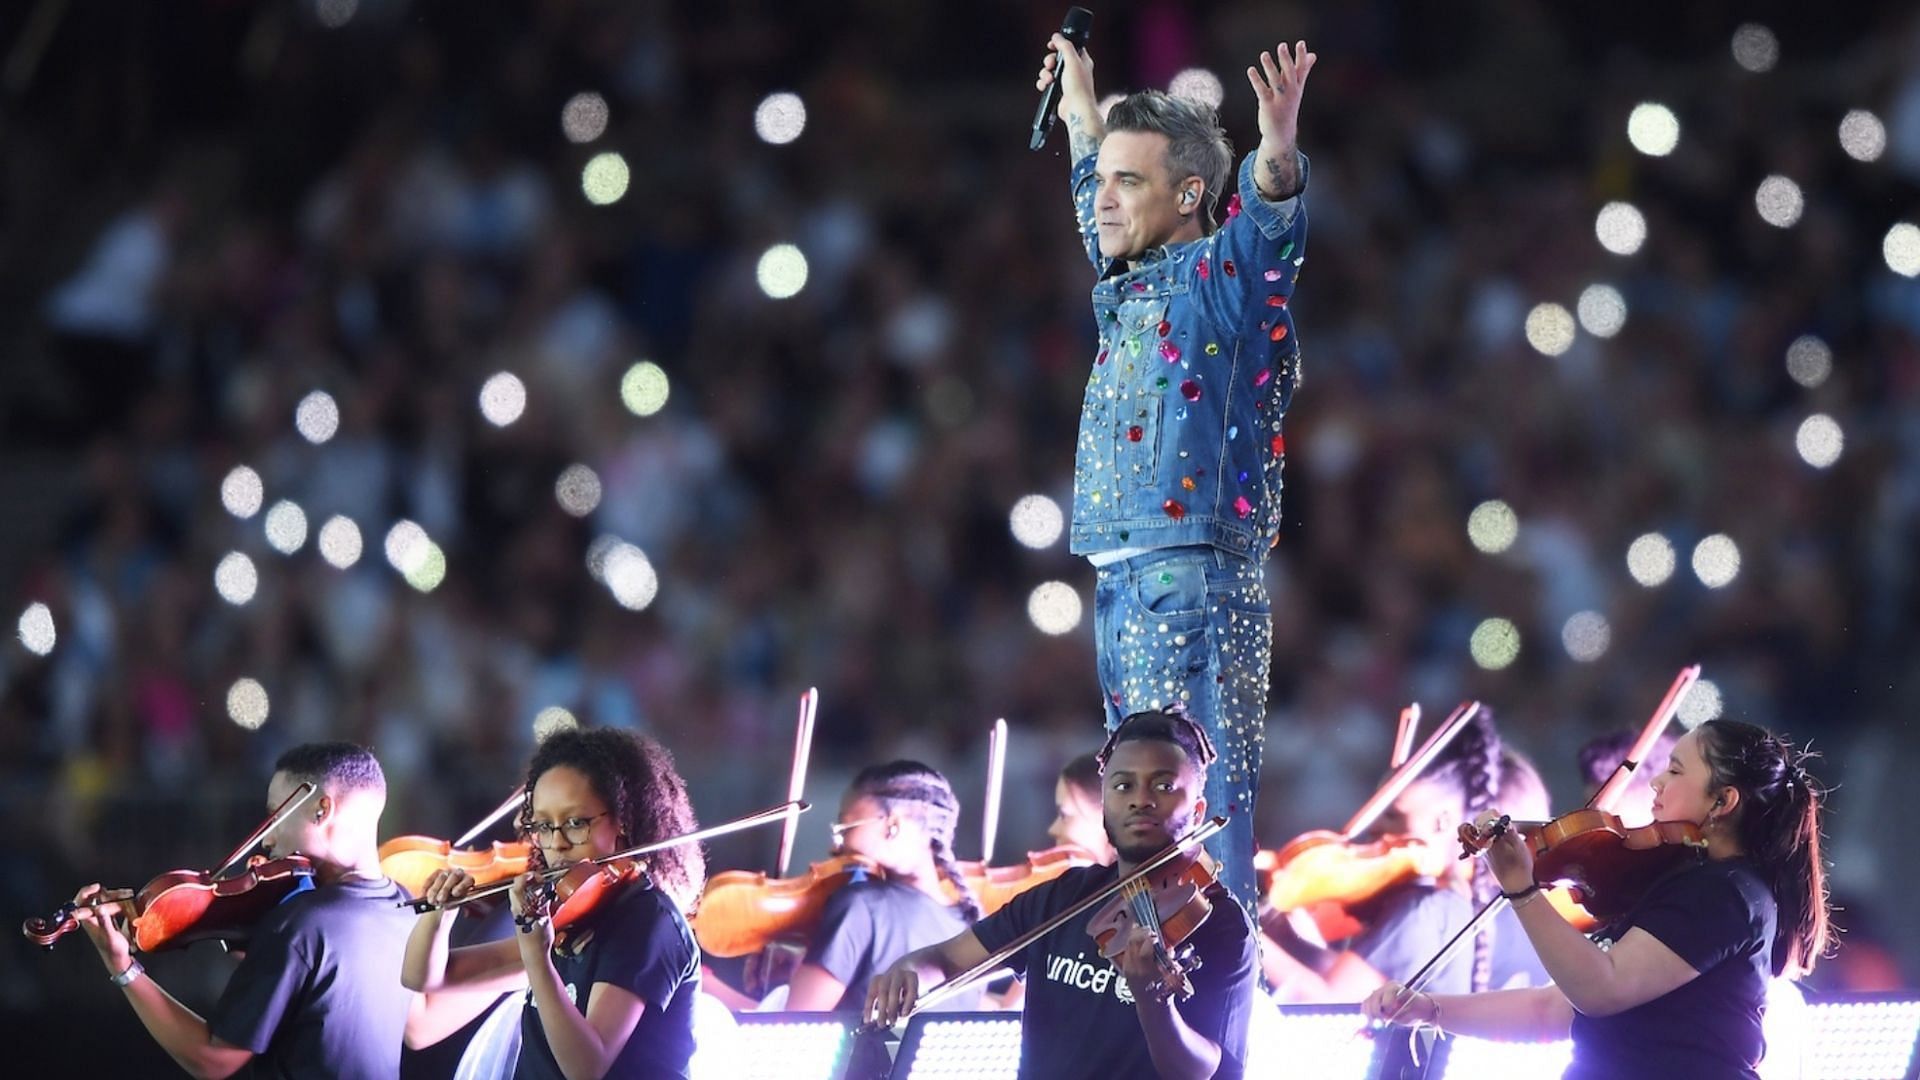 Robbie Williams has come under fire for saying yes to performing at the World Cup. (Image via Alex Davidson / Getty)